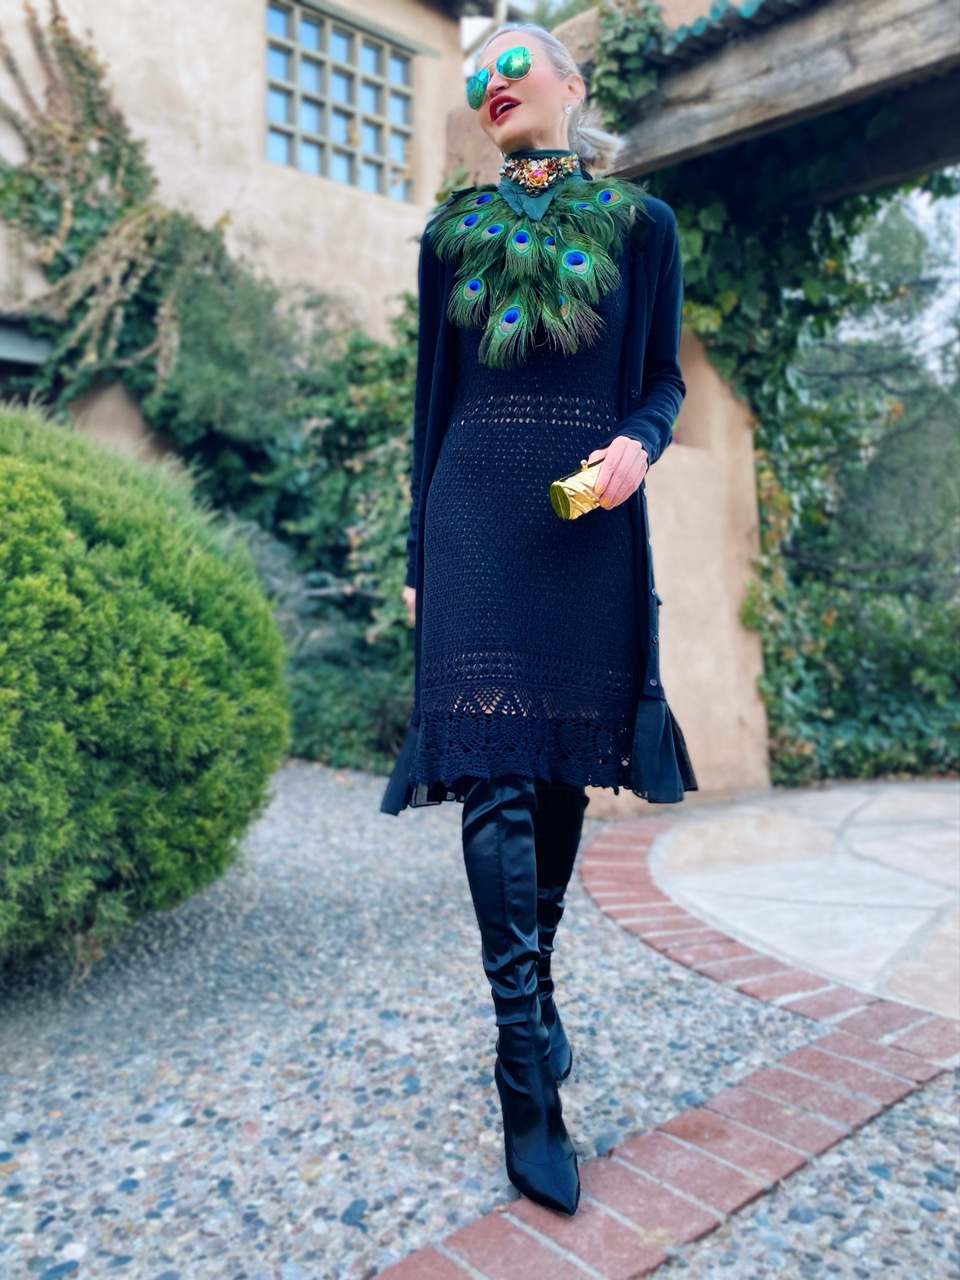 Lifestyle Influencer, Jamie Lewinger of More Than Turquoise wearing J Ewing LUX Peacock necklace in New Mexico 